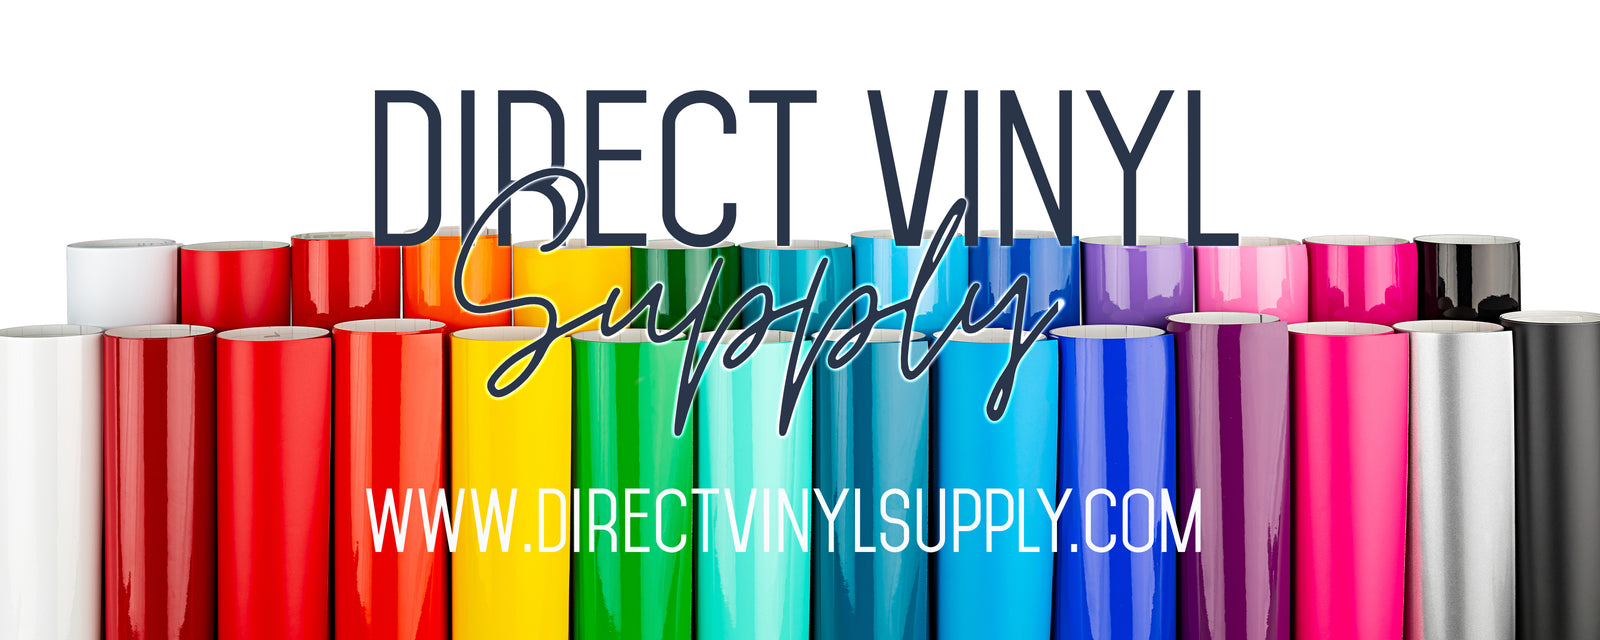 Products Tagged THERMOFLEX - Direct Vinyl Supply